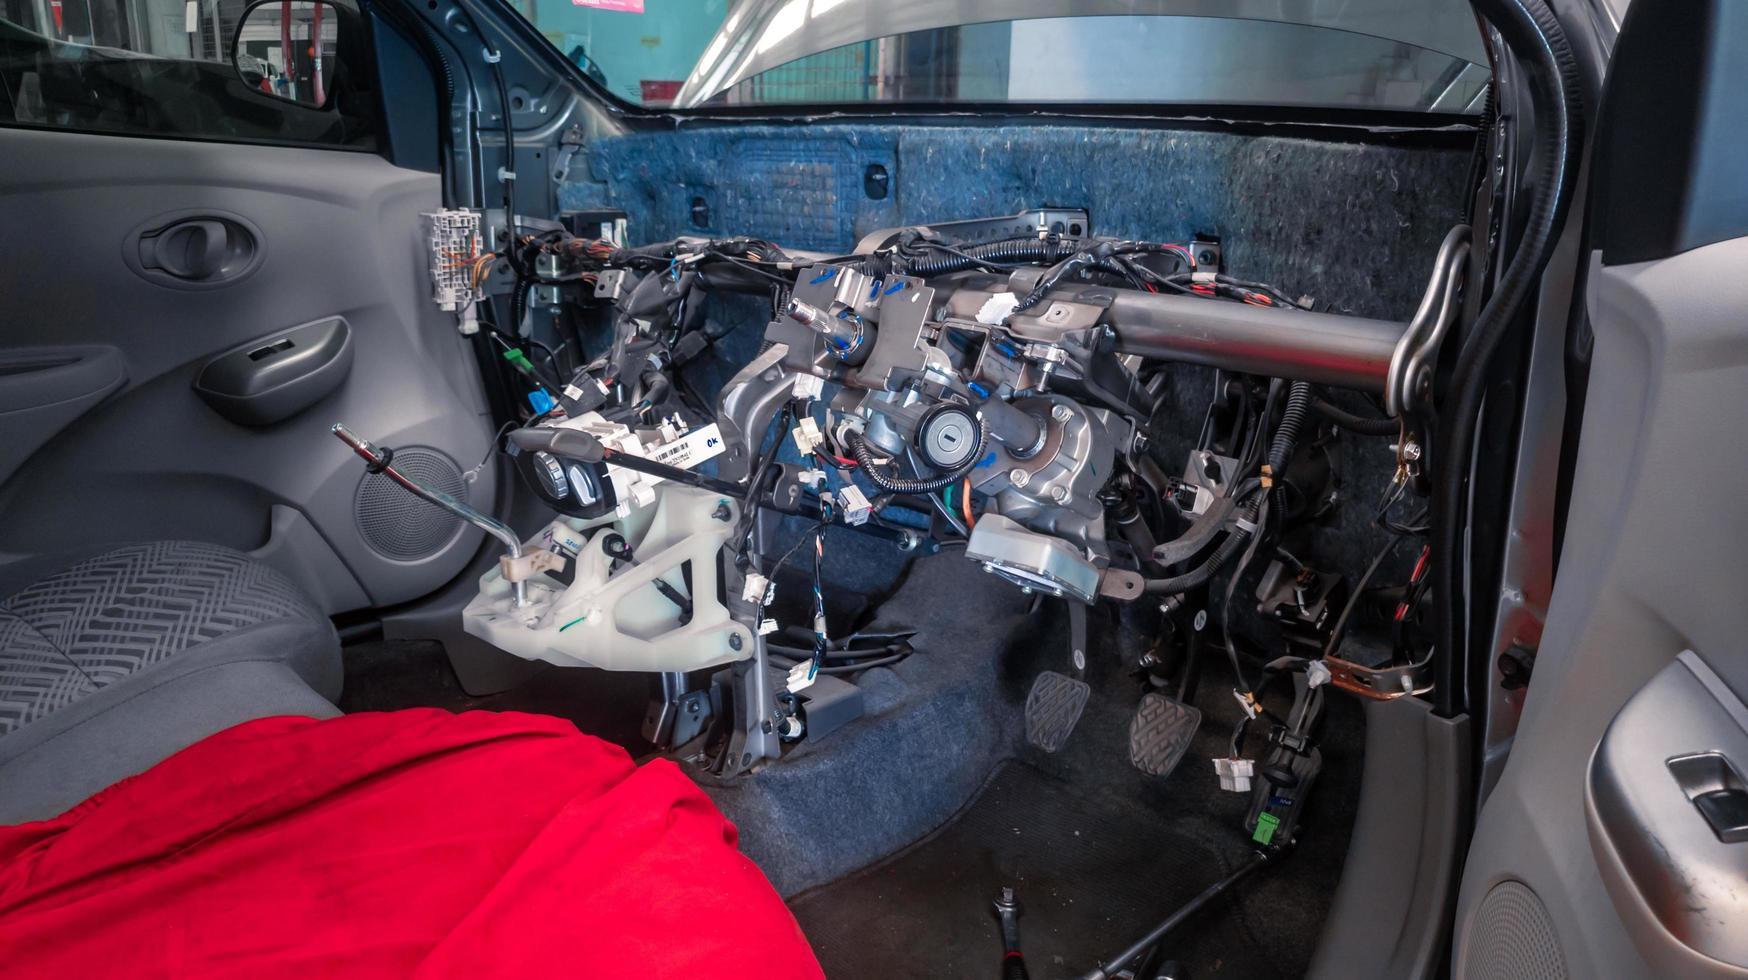 interior or dashboard of a car that is being disassembled or repaired, the steering column frame, shift lever, and interior cables are visible photo